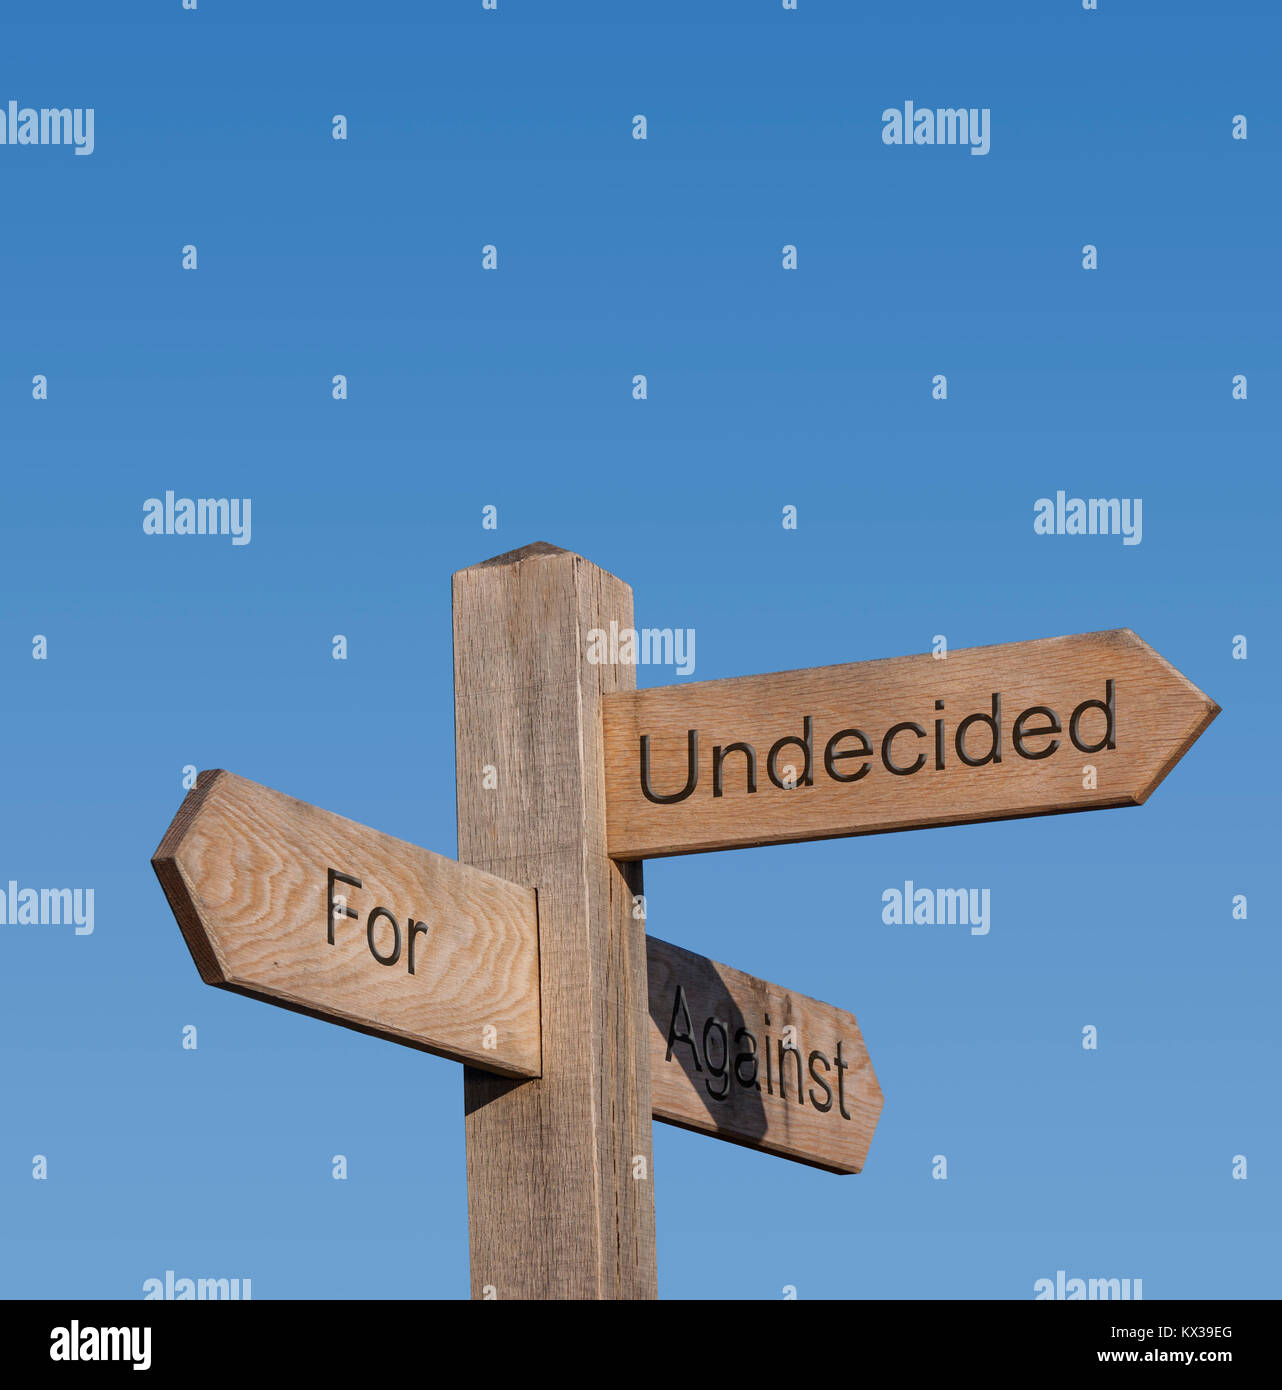 Signpost directions showing the words For, Against, Undecided Stock Photo